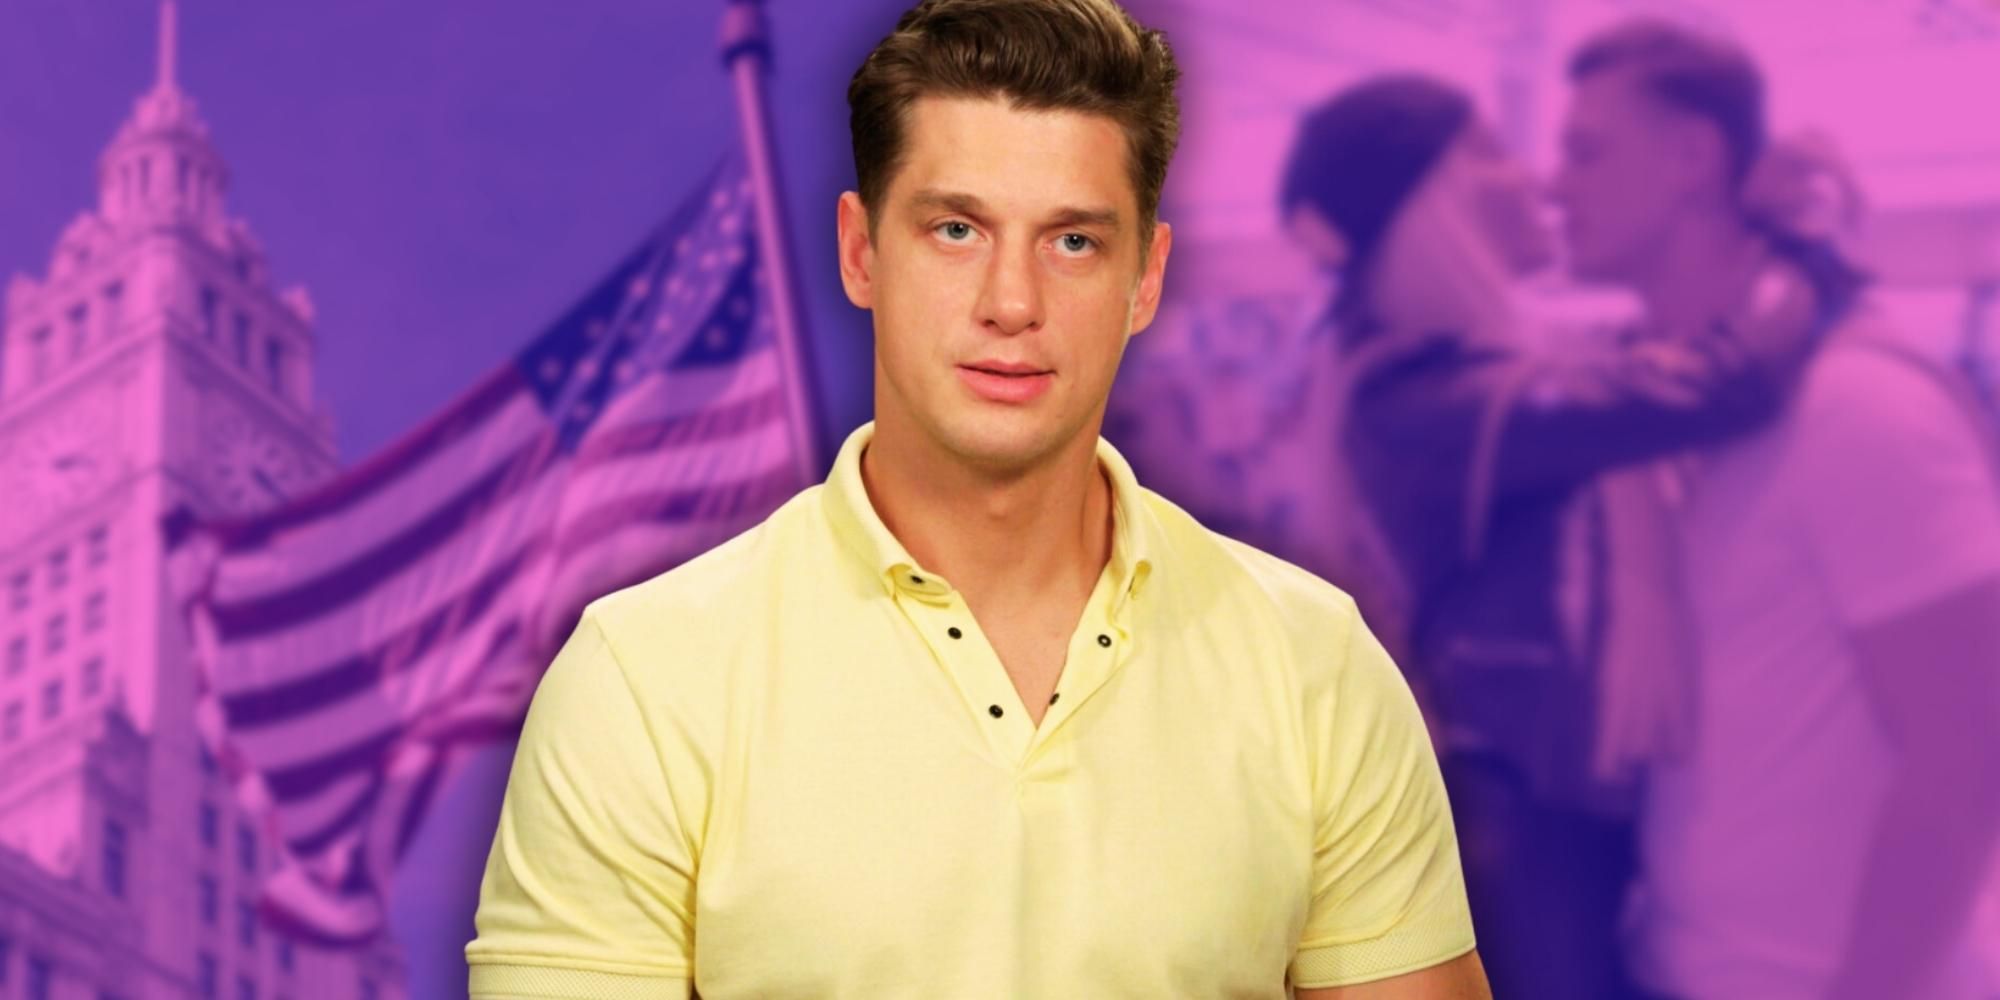 justin 90 day fiance in yellow shirt with purple background